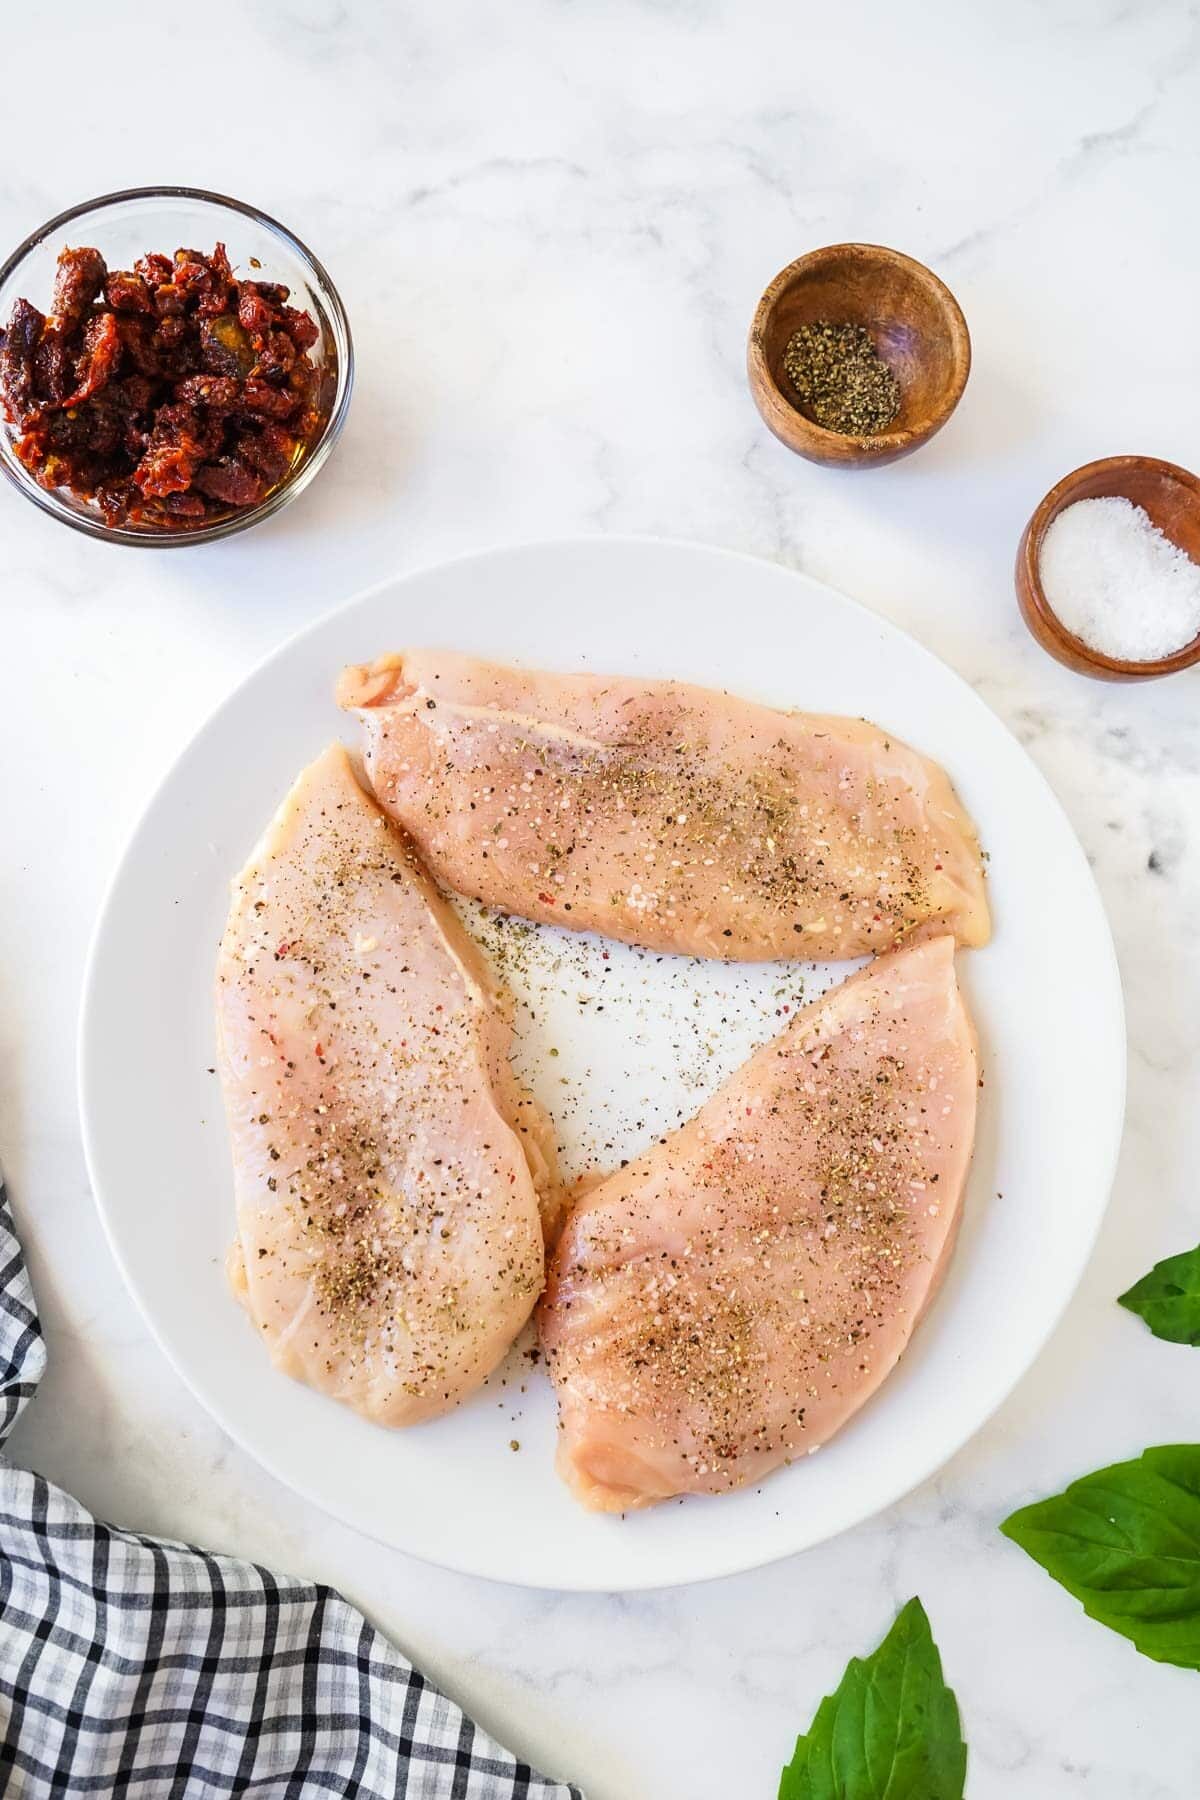 Raw chicken breasts seasoned with salt and pepper on a plate.